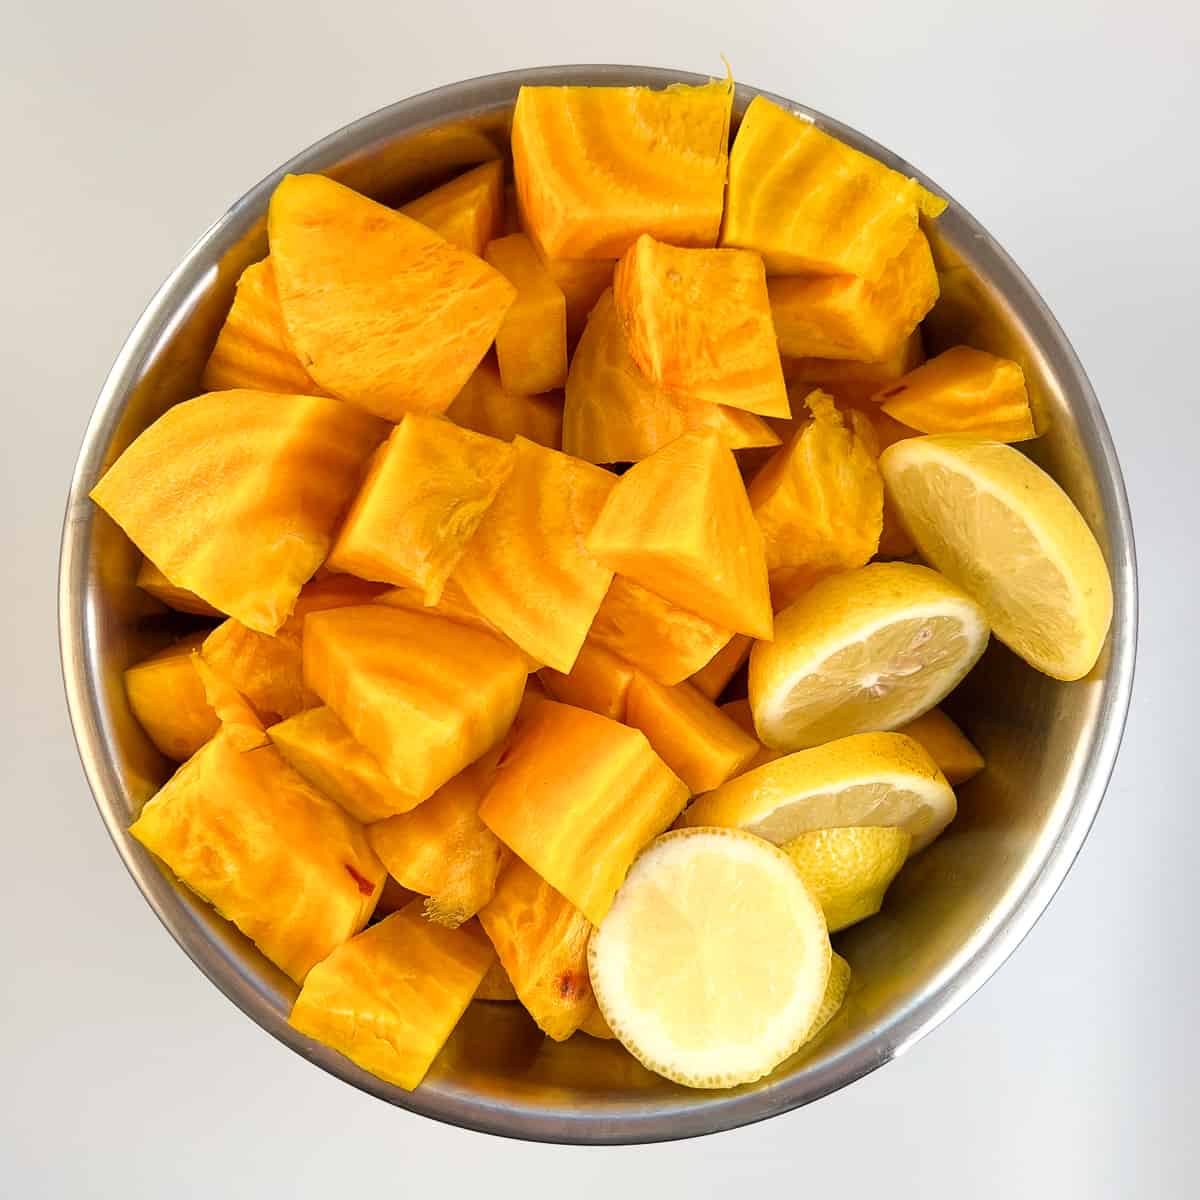 A bowl with chunks of golden beets and lemon slices, ready for juicing.